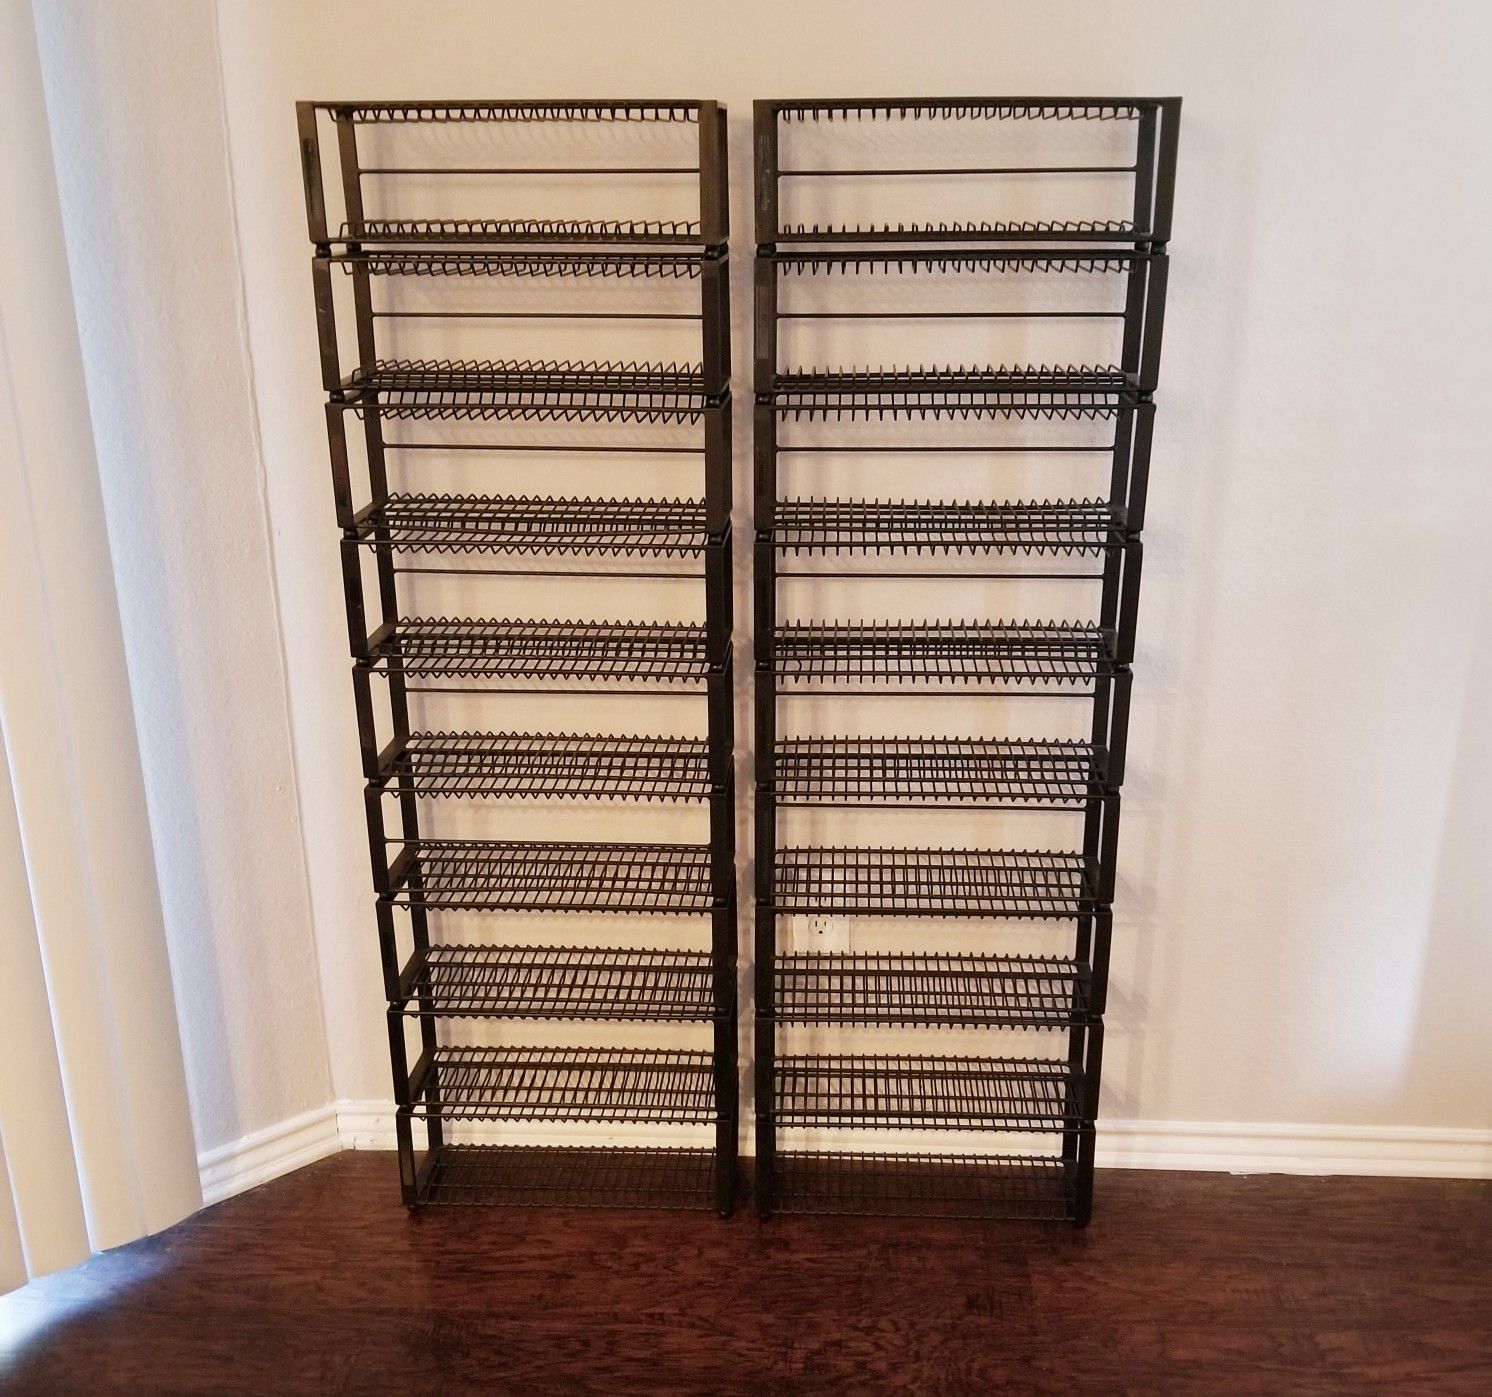 18 black metal stackable CD racks. Excellent quality. $1.50 each or $20 for all 18. Custer/Legacy Plano